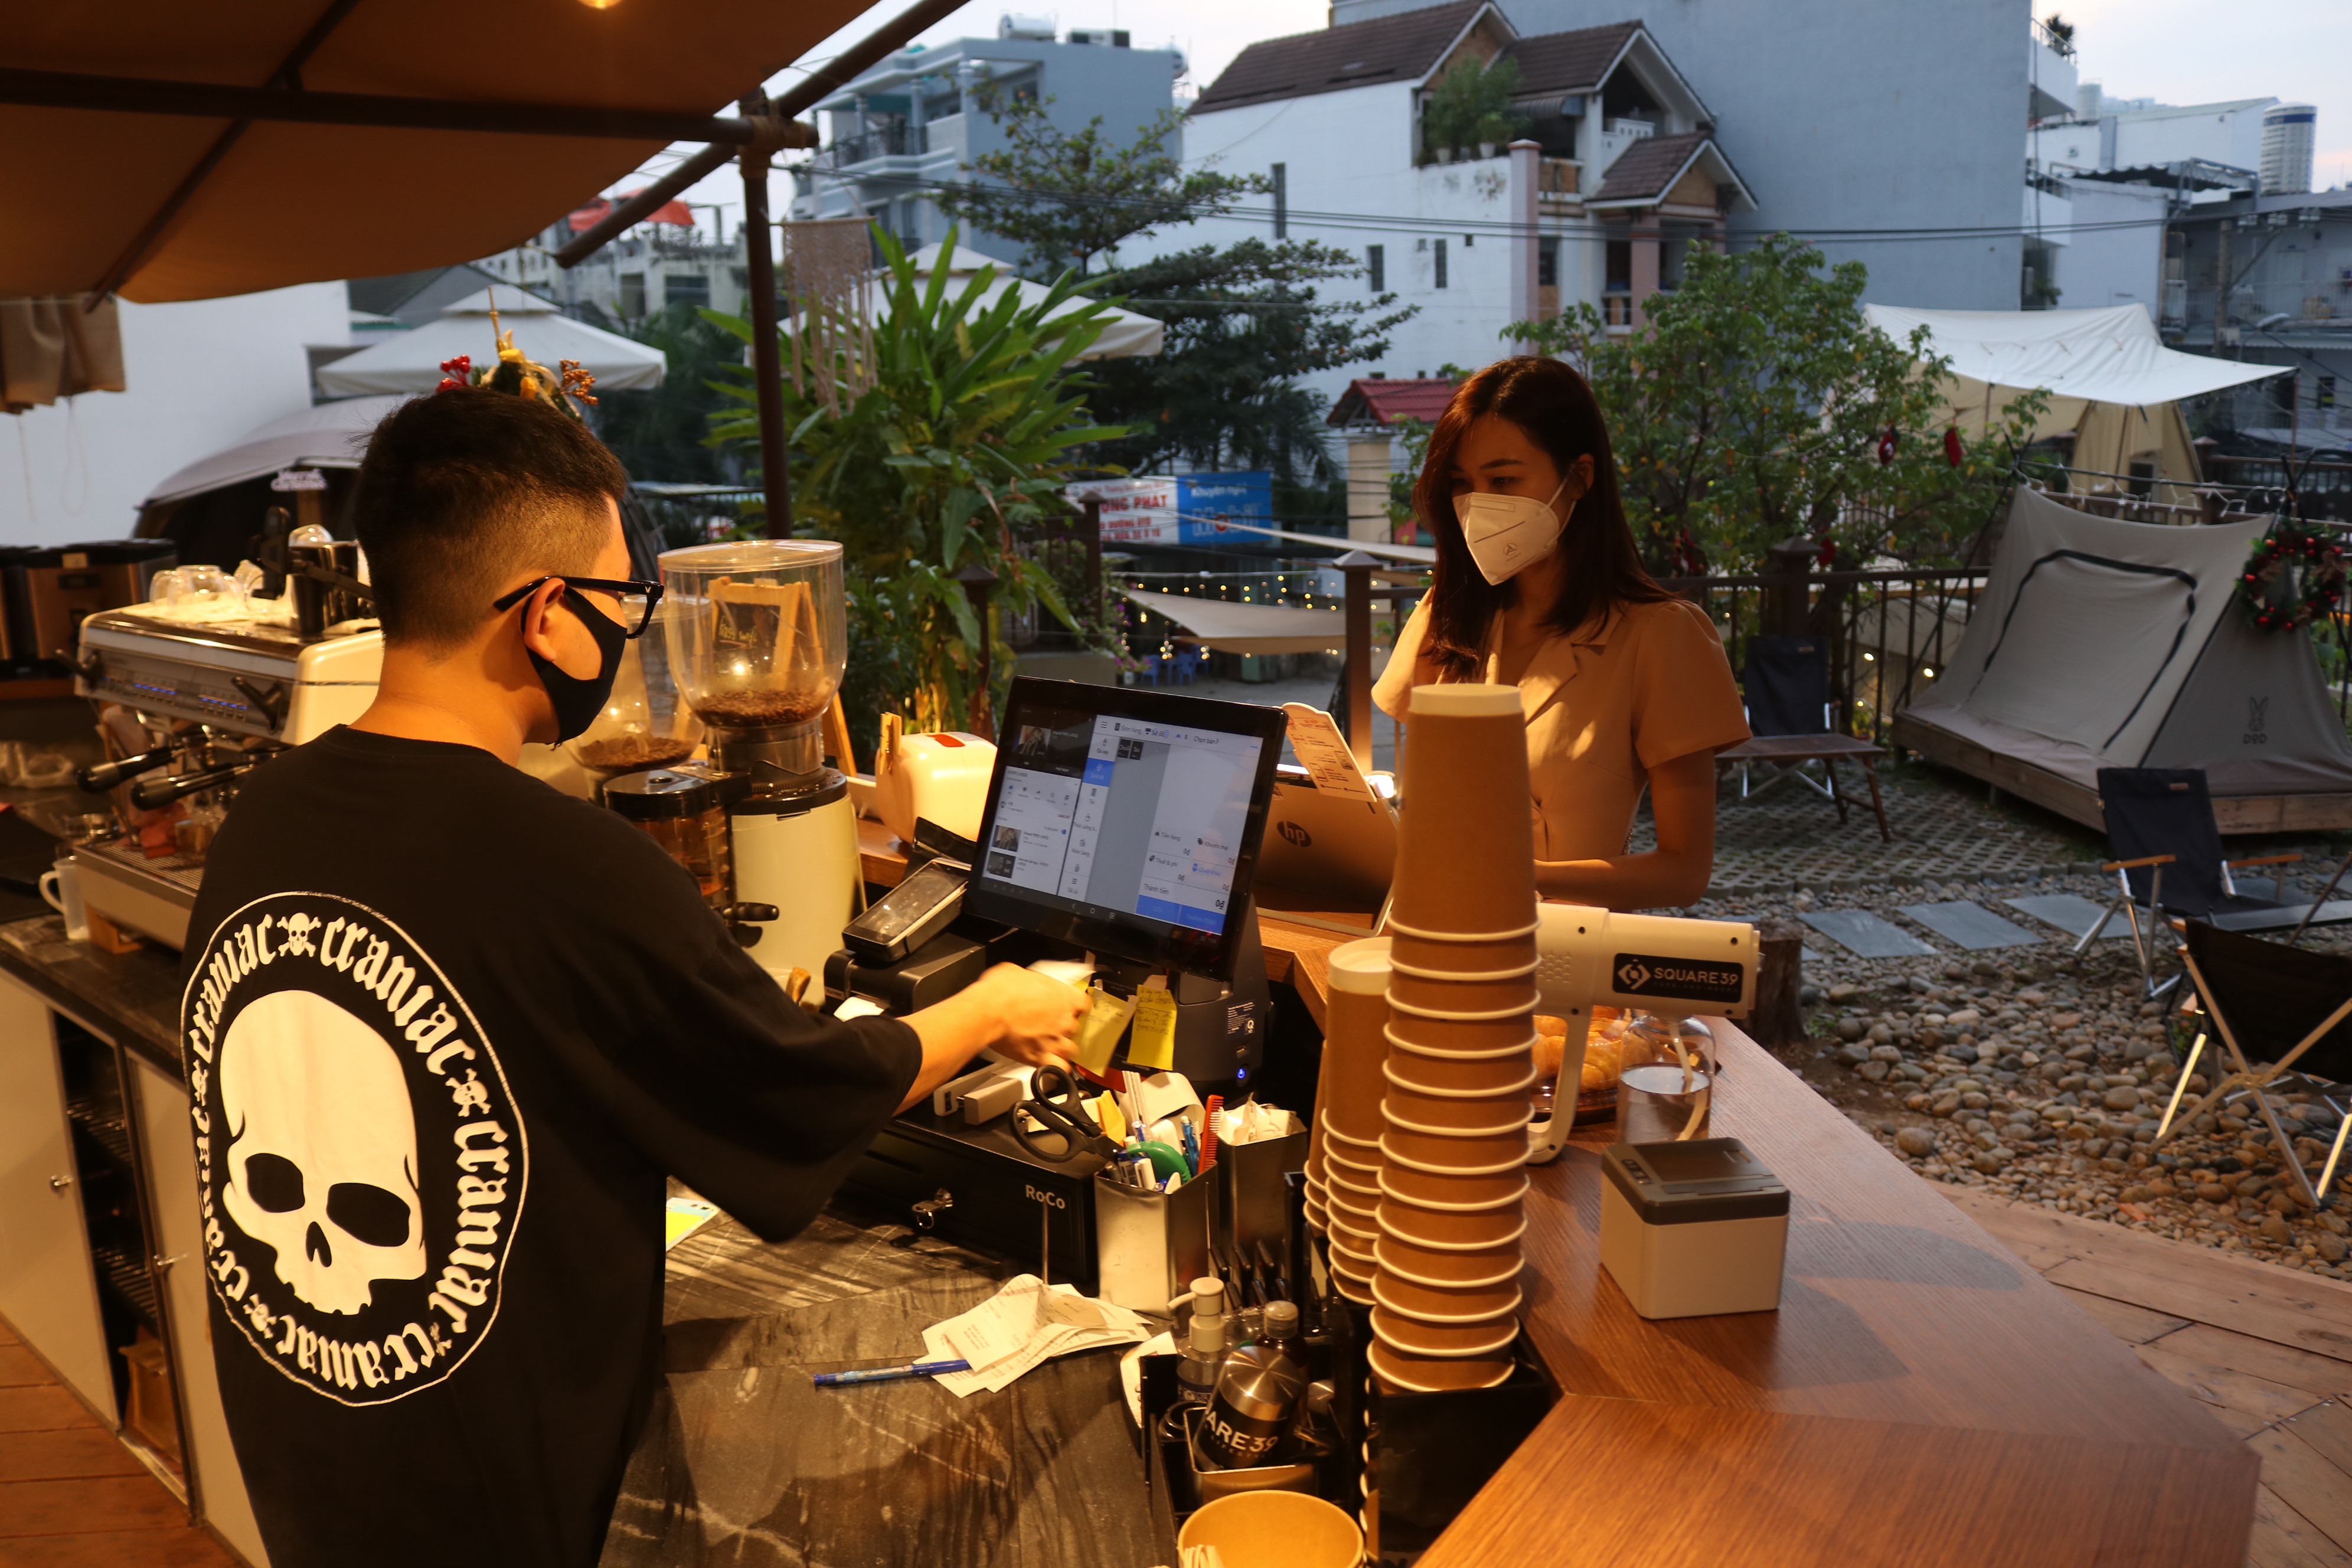 A customer is ordering drinks at the Square 39 coffee shop in Thu Duc City in Ho Chi Minh City on December 2, 2021. Photo: Hoang An / Tuoi Tre News